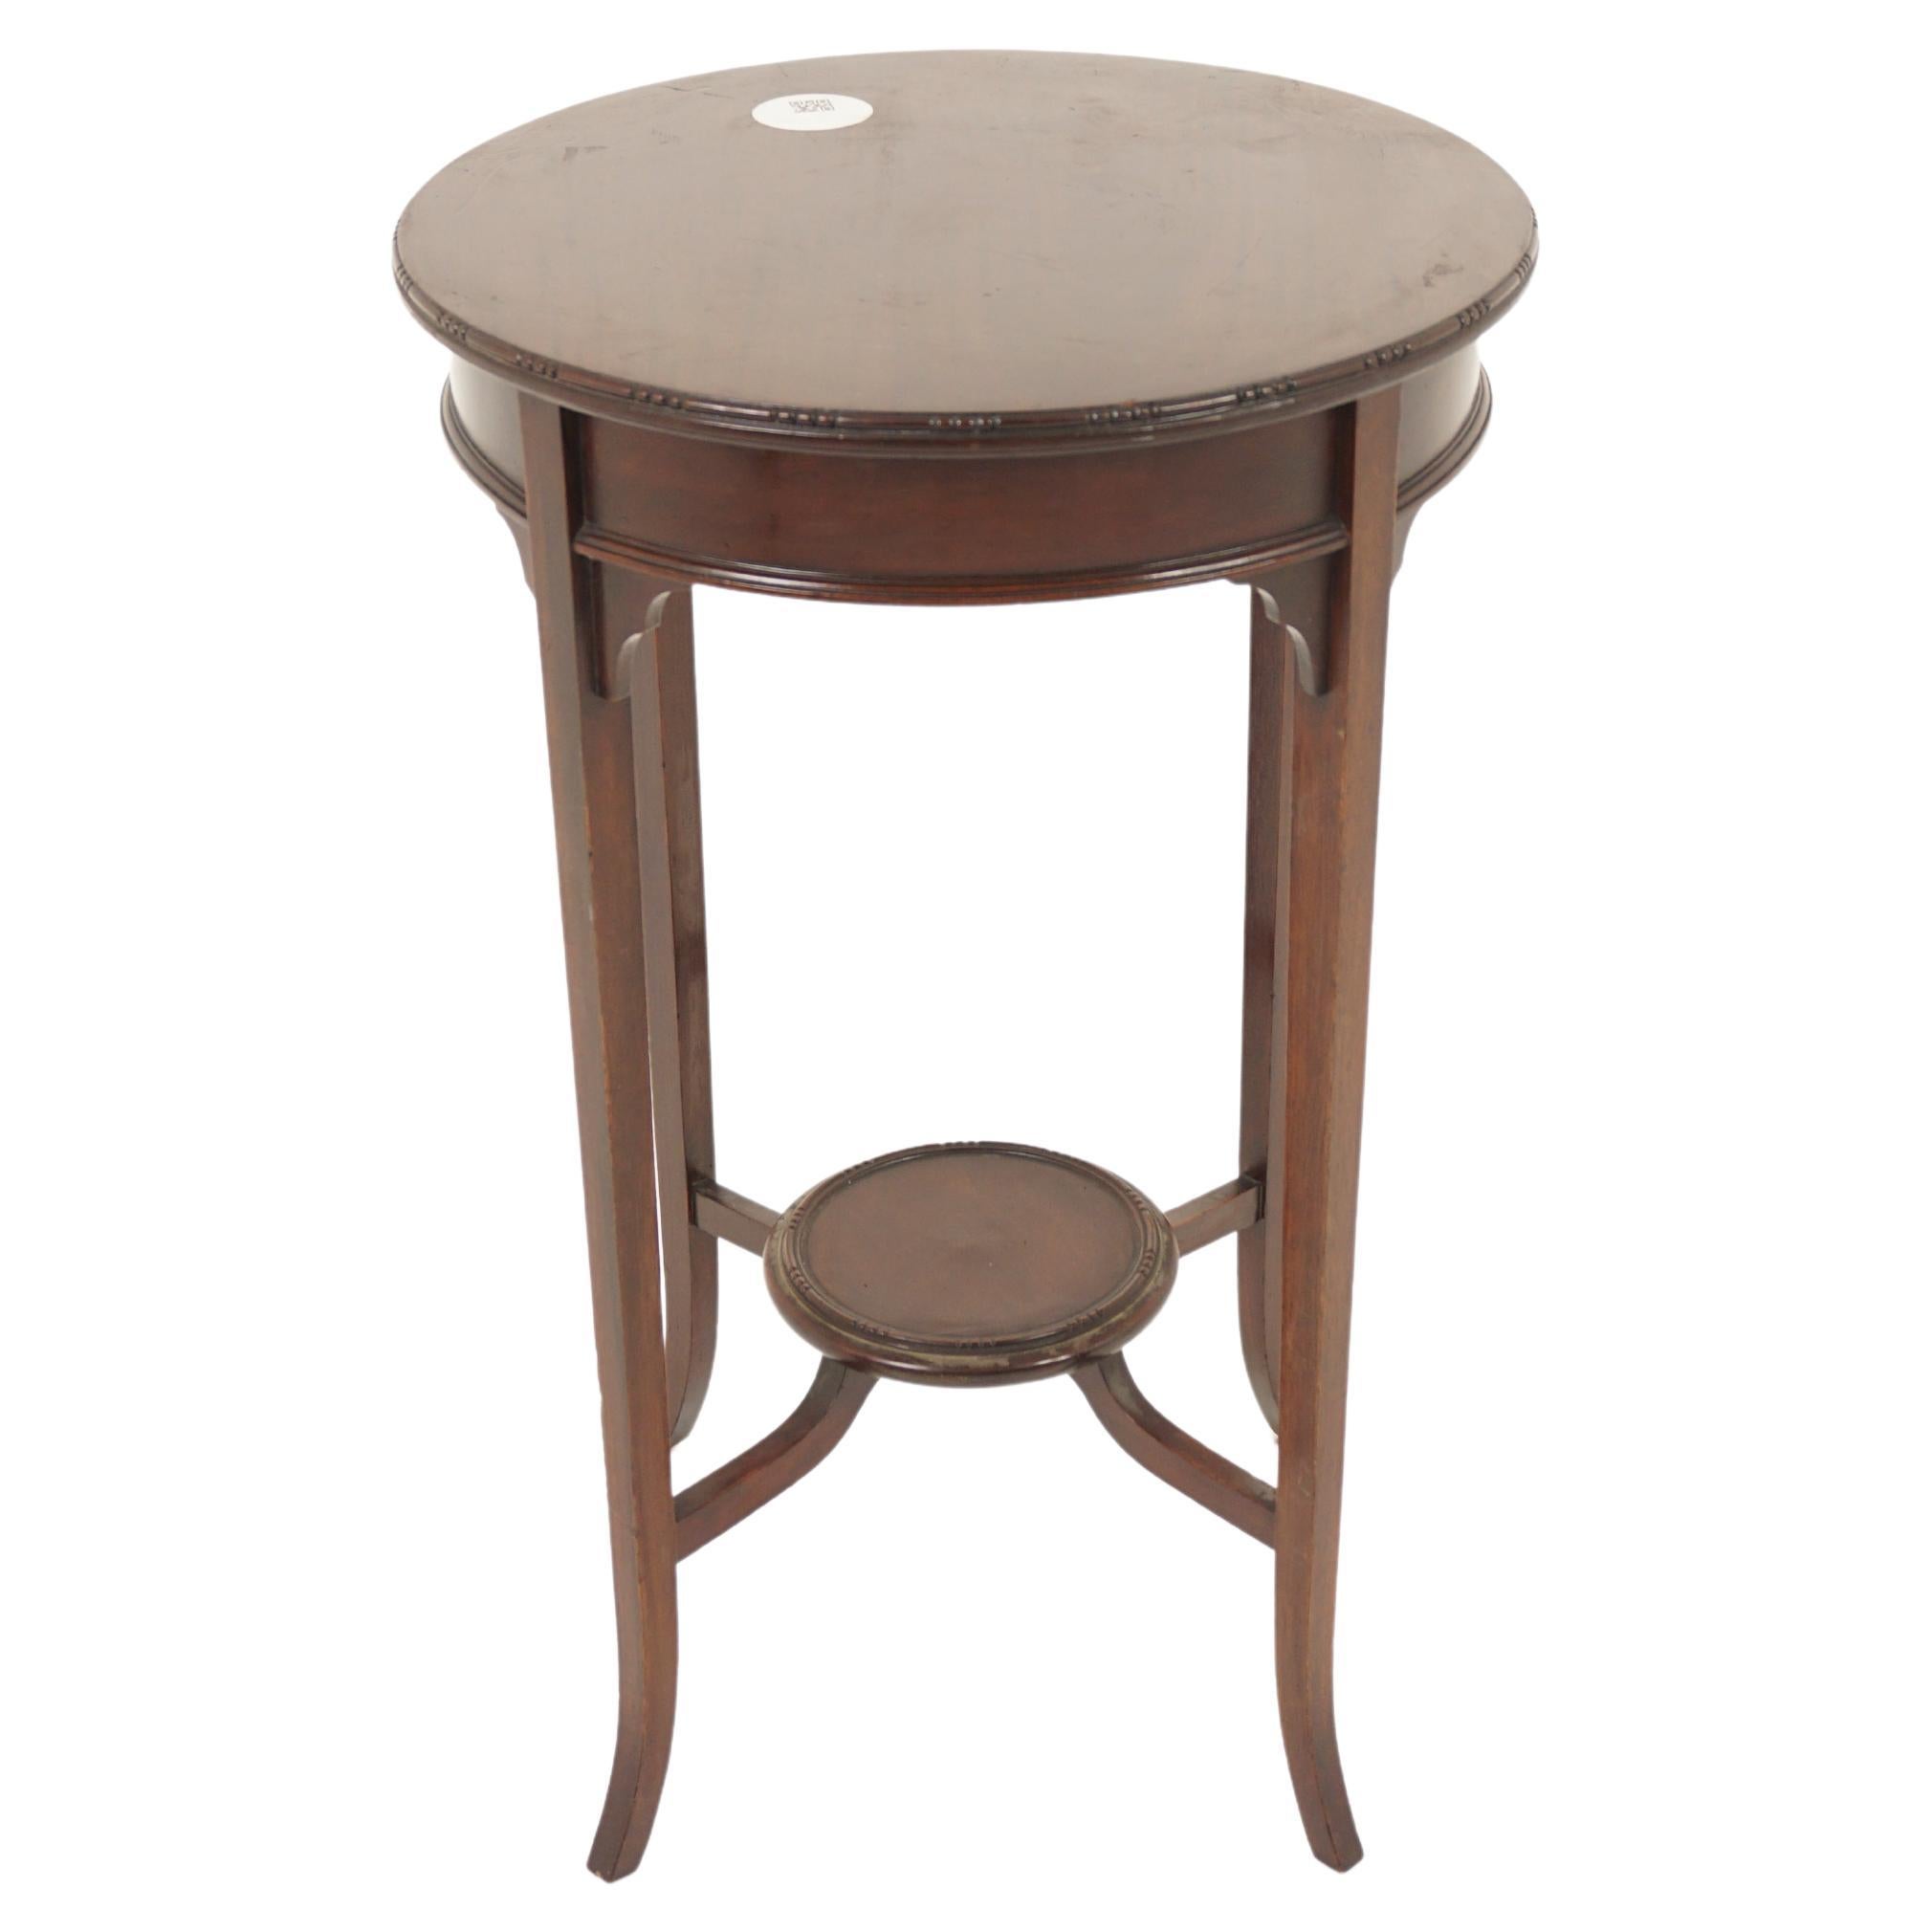 Antique Walnut Table, Two-Tiered Circular Occasional Table, Scotland 1900, H1125